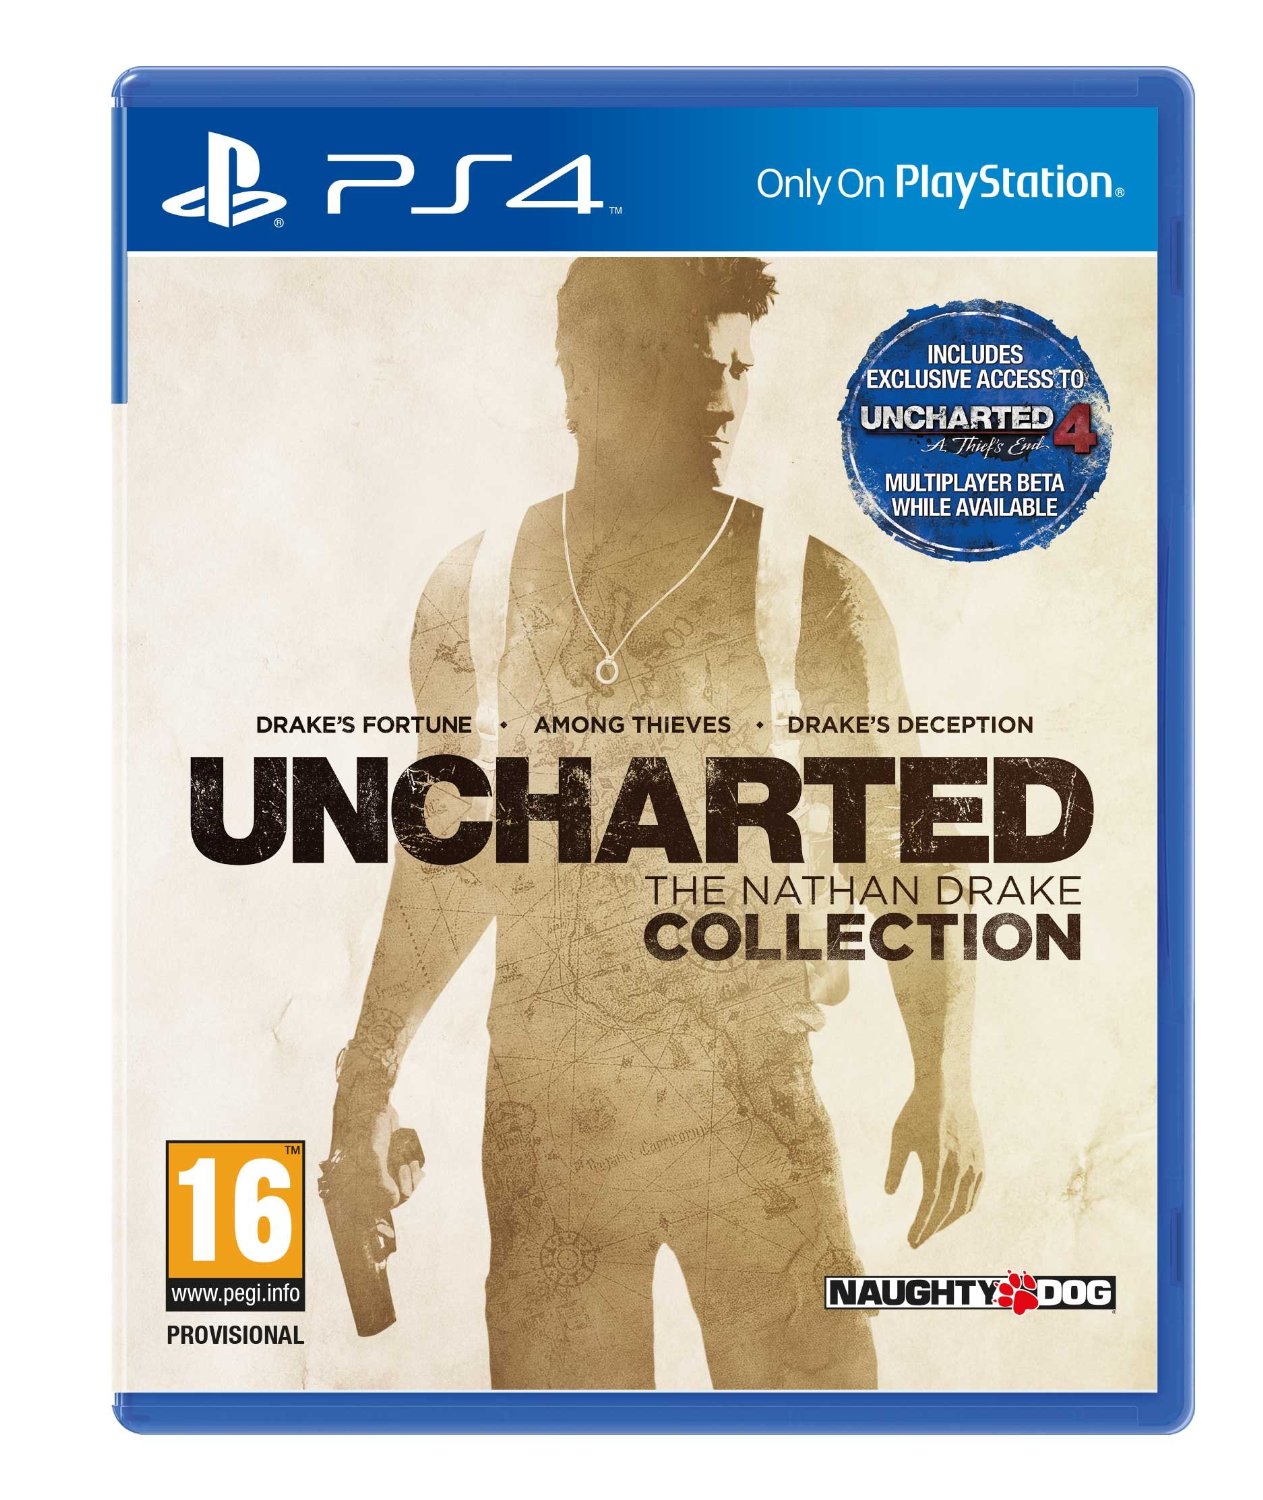 Uncharted: The Nathan Drake Collection Digital Copy CD Key (Playstation 4): Europe